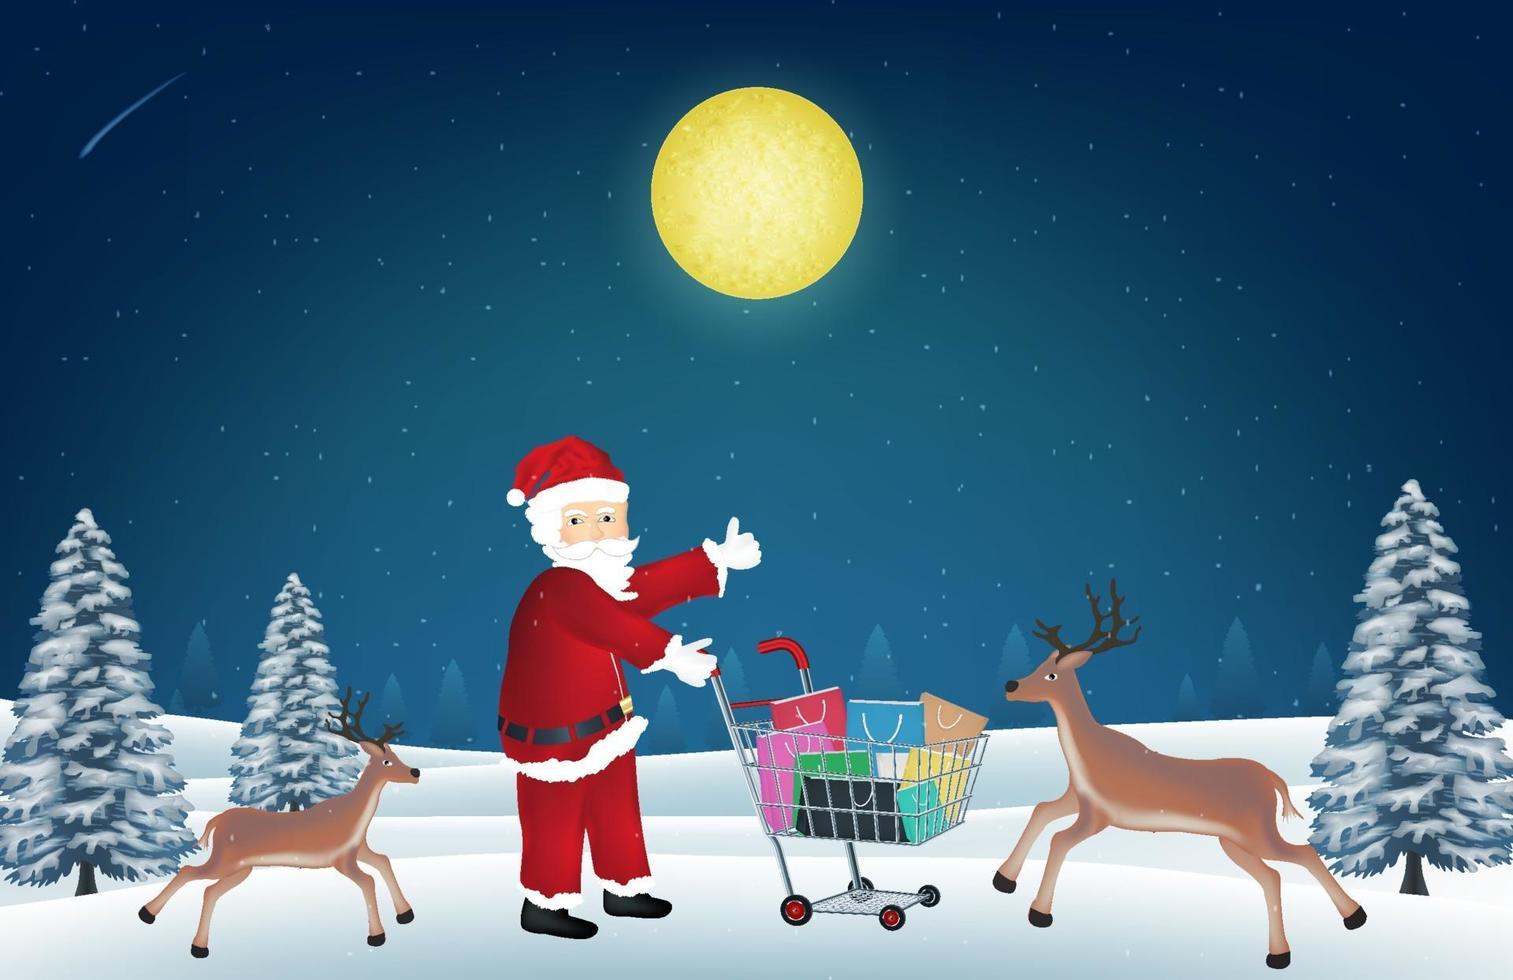 santa claus with reindeer and shopping bag on cart vector